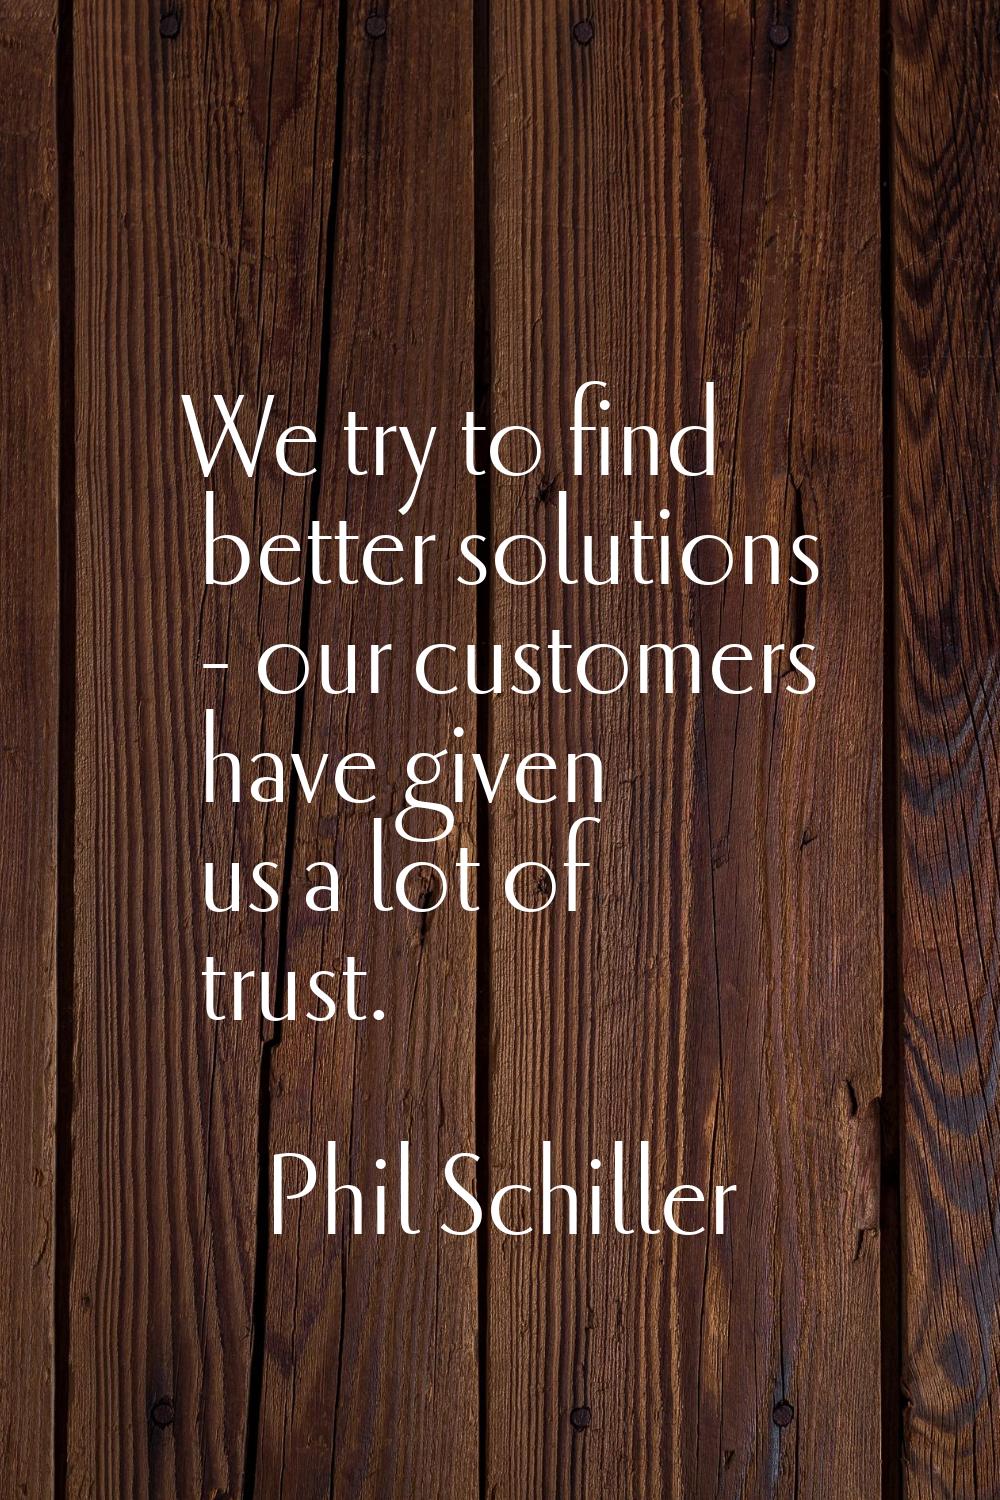 We try to find better solutions - our customers have given us a lot of trust.